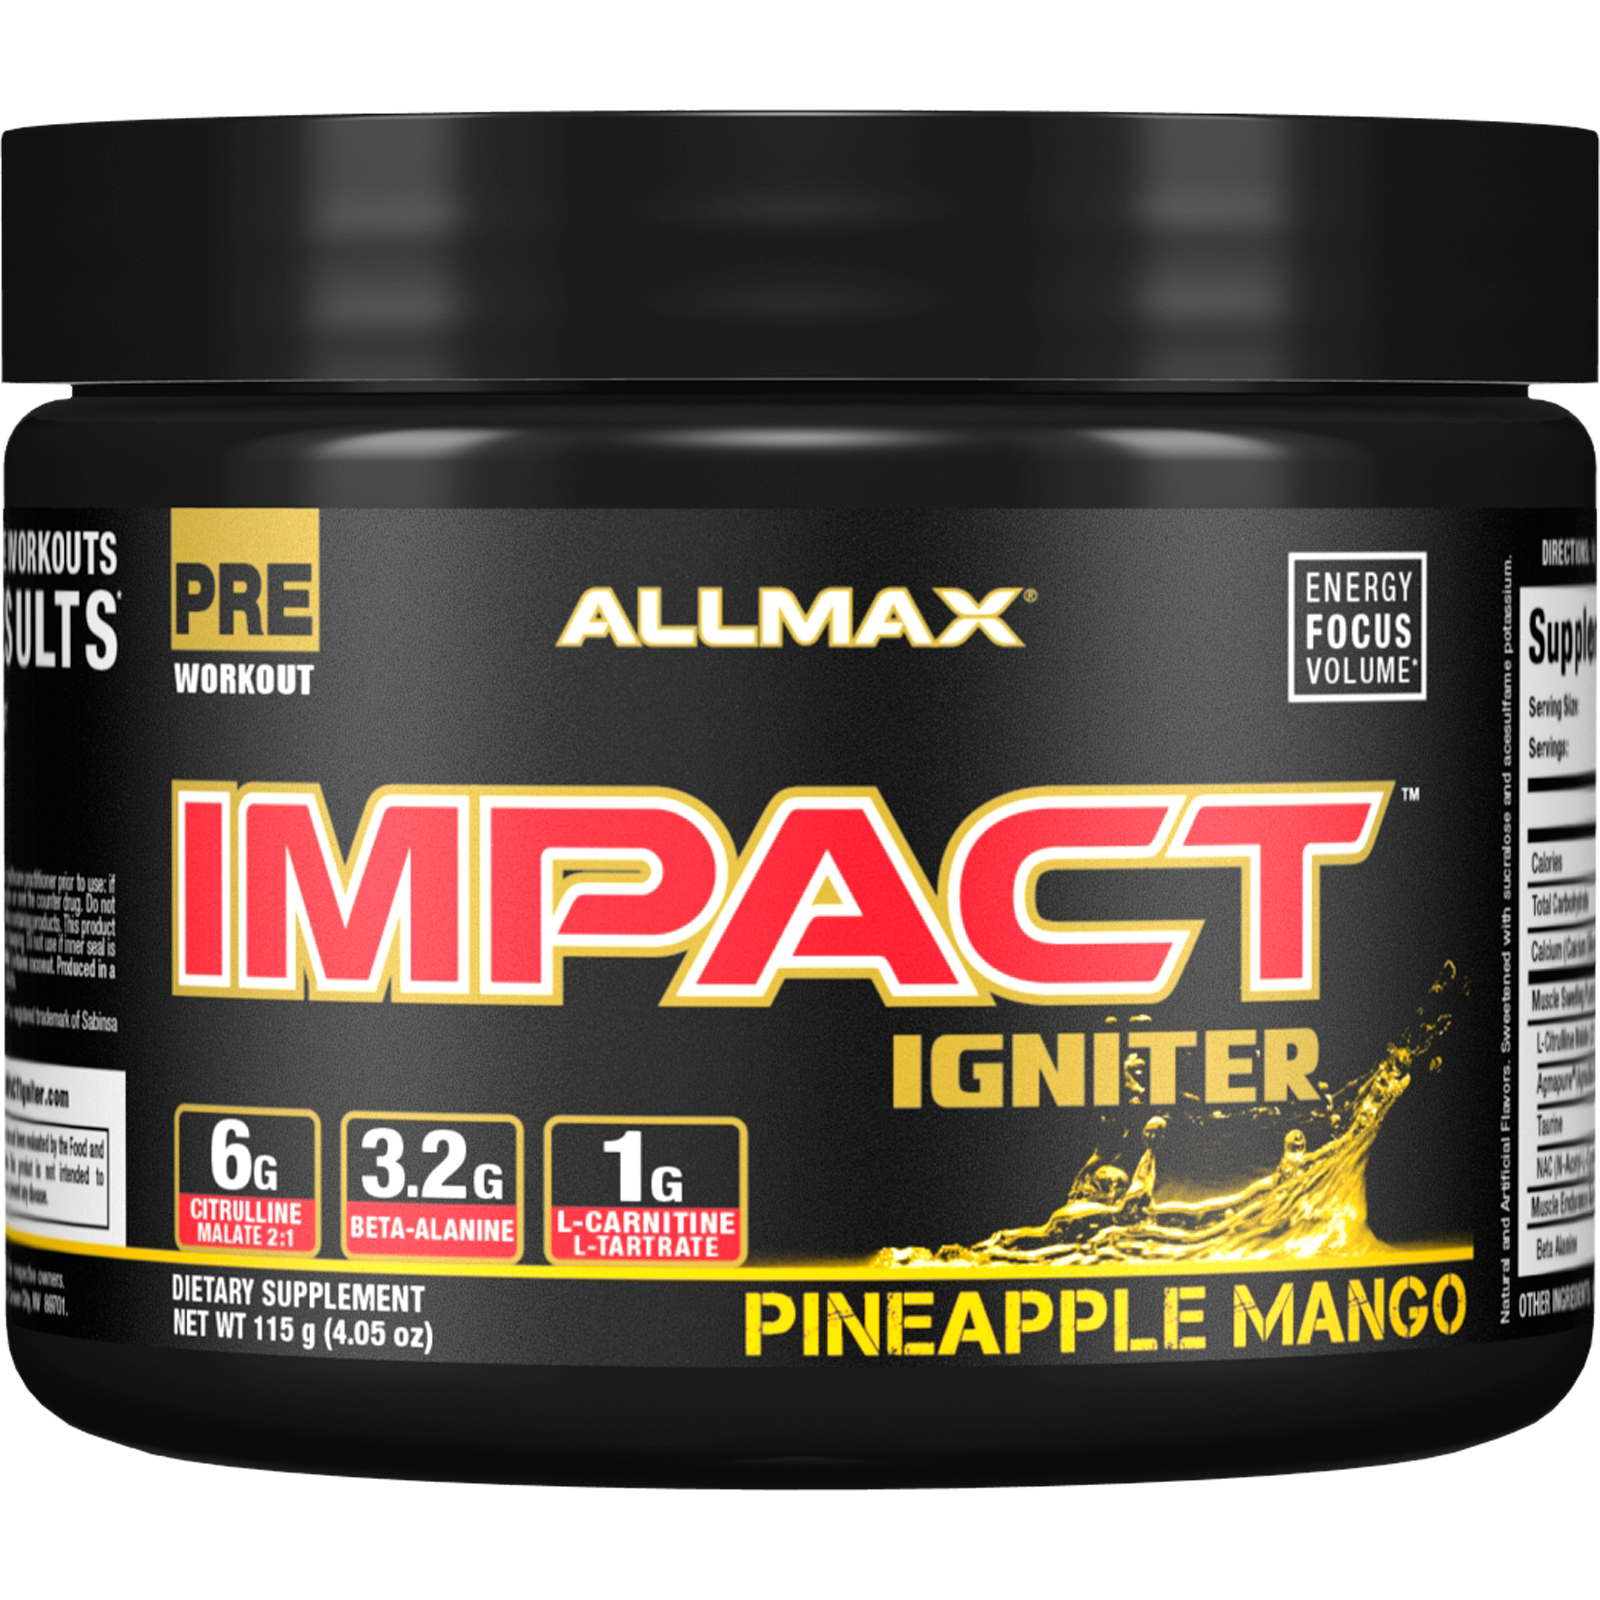 15 Minute Allmax hvol pre workout for push your ABS